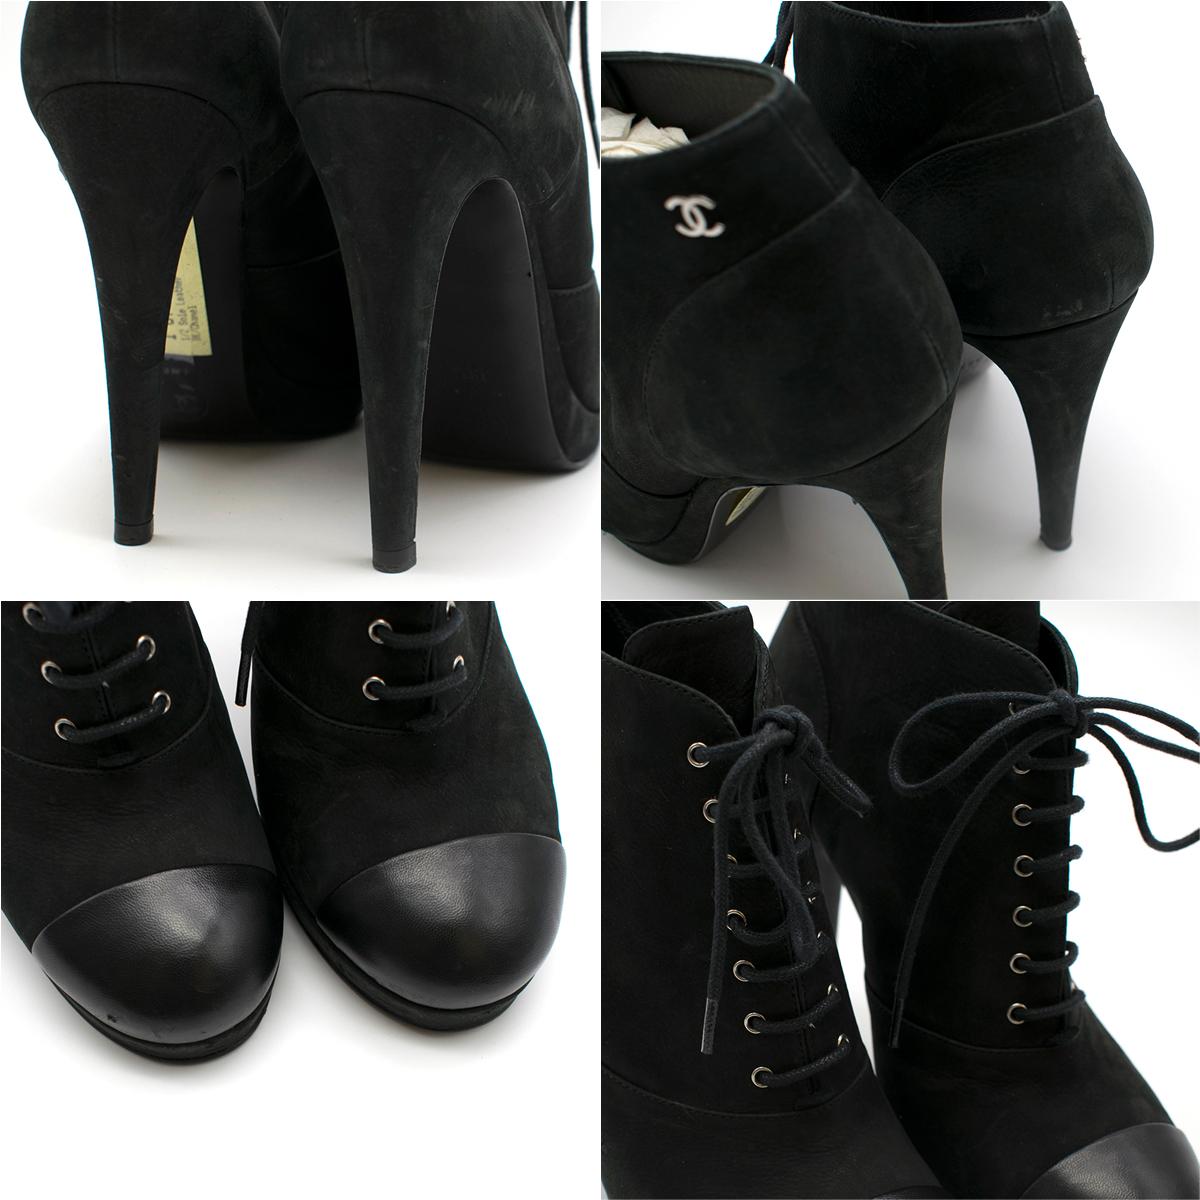 Chanel Black Leather Lace-Up Ankle Boots 38.5 2